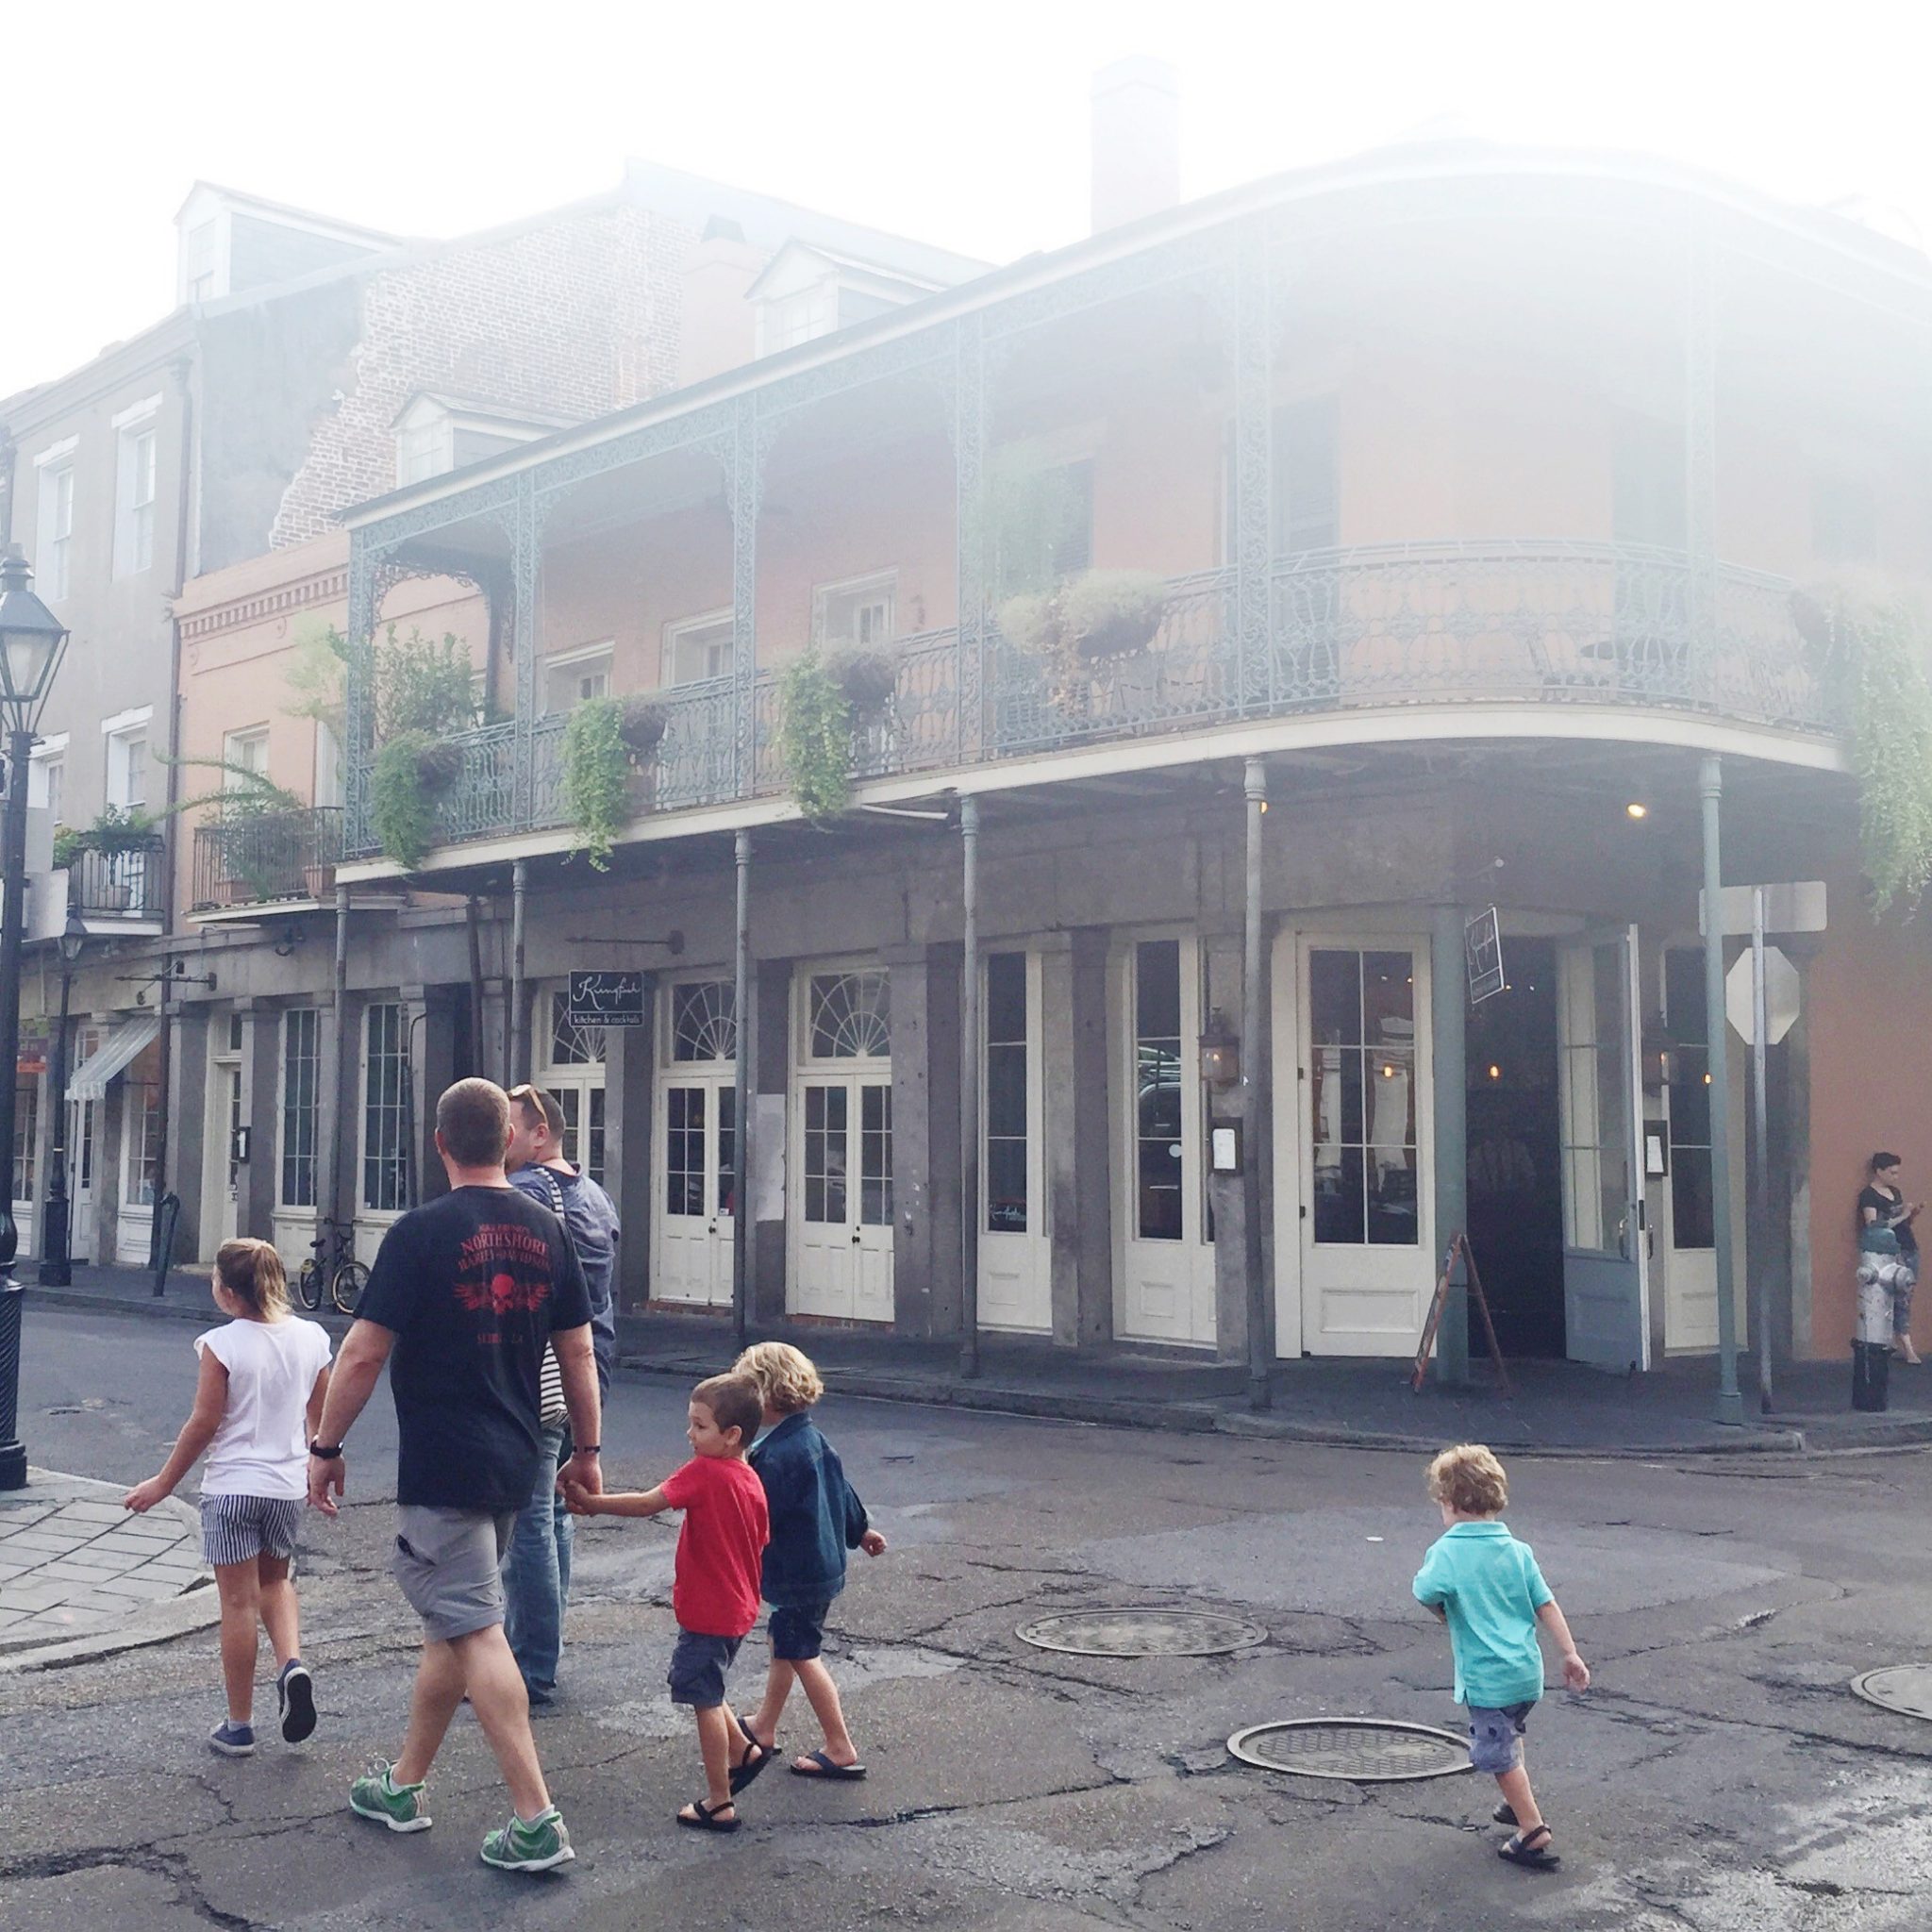 Family friendly travel to New Orleans… where to stay, what to eat and what to do!